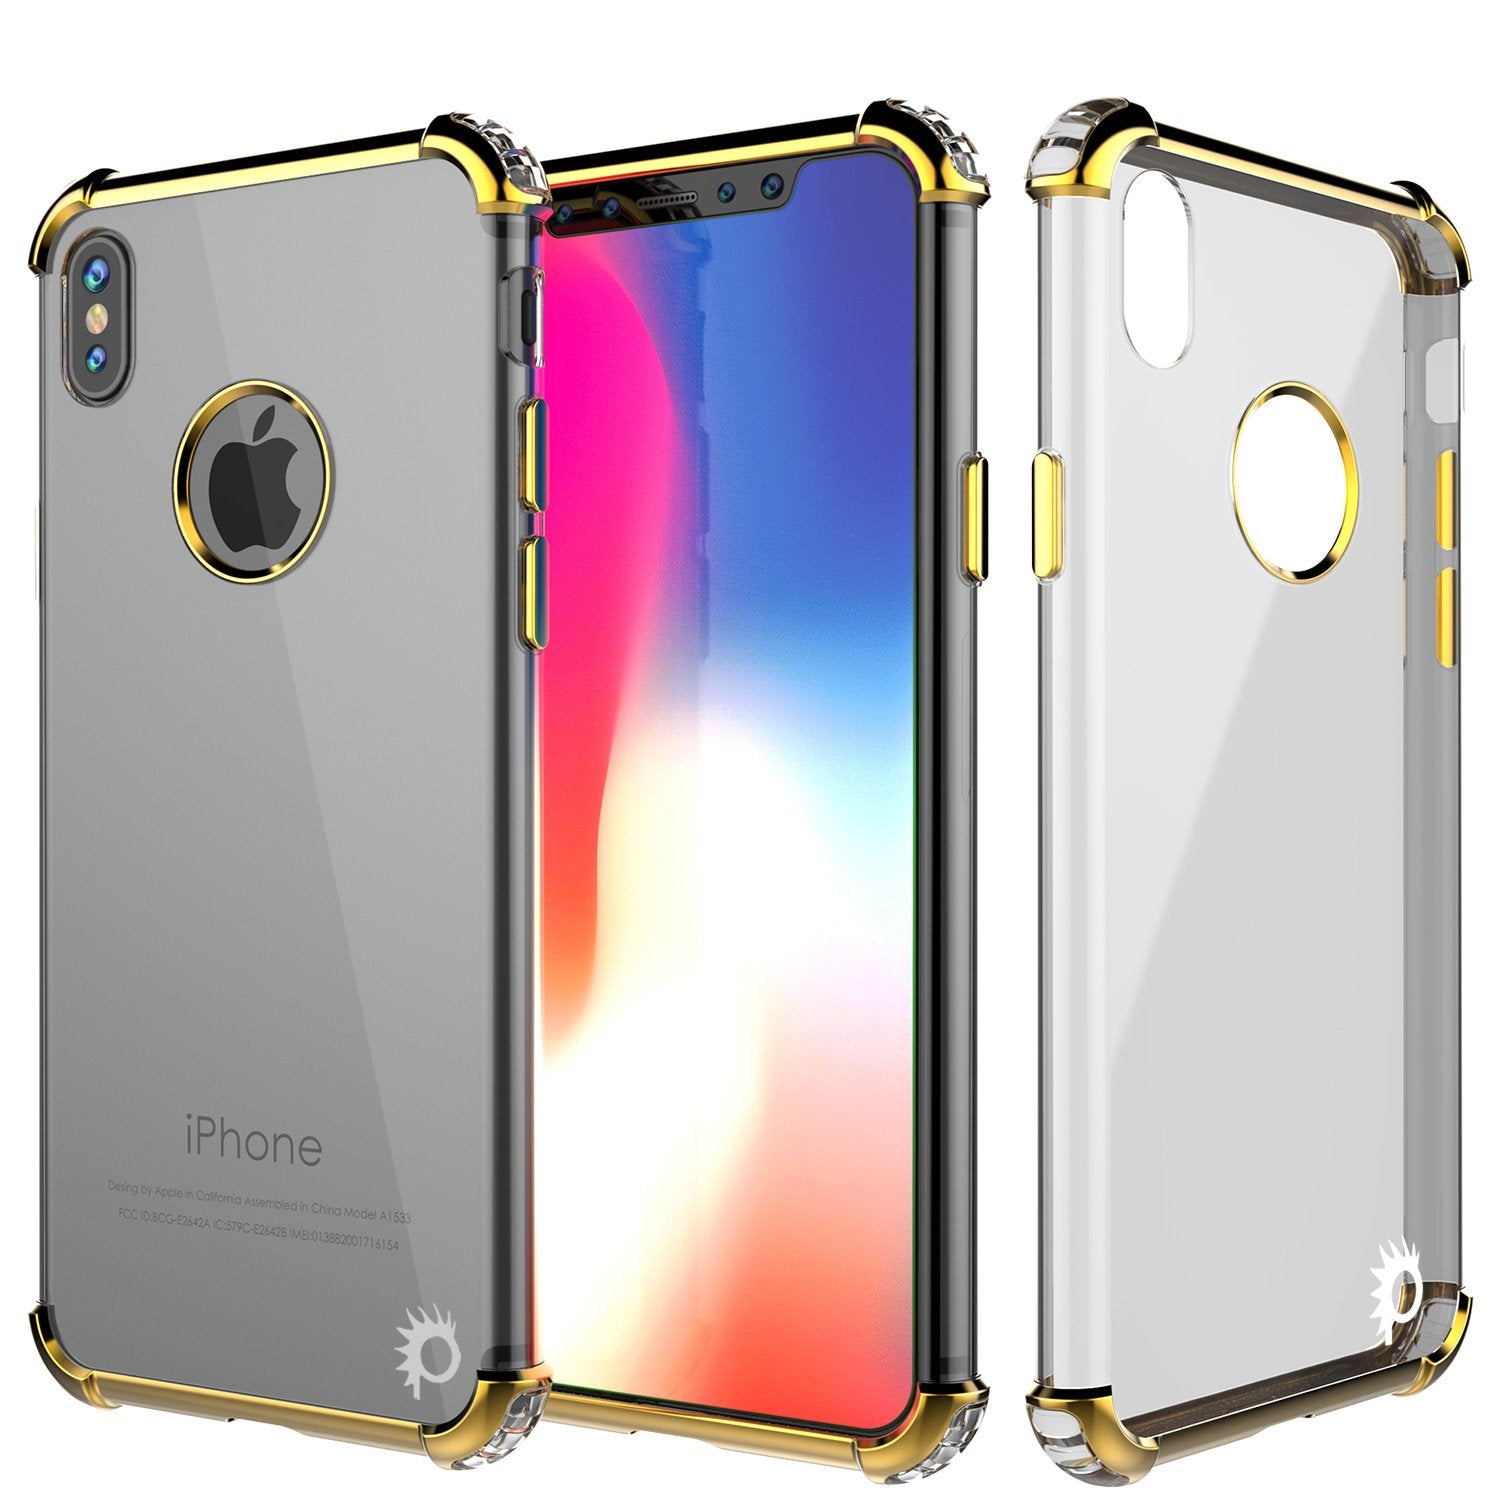 iPhone X Case, Punkcase [BLAZE SERIES] Protective Cover W/ PunkShield Screen Protector [Shockproof] [Slim Fit] for Apple iPhone 10 [Gold]